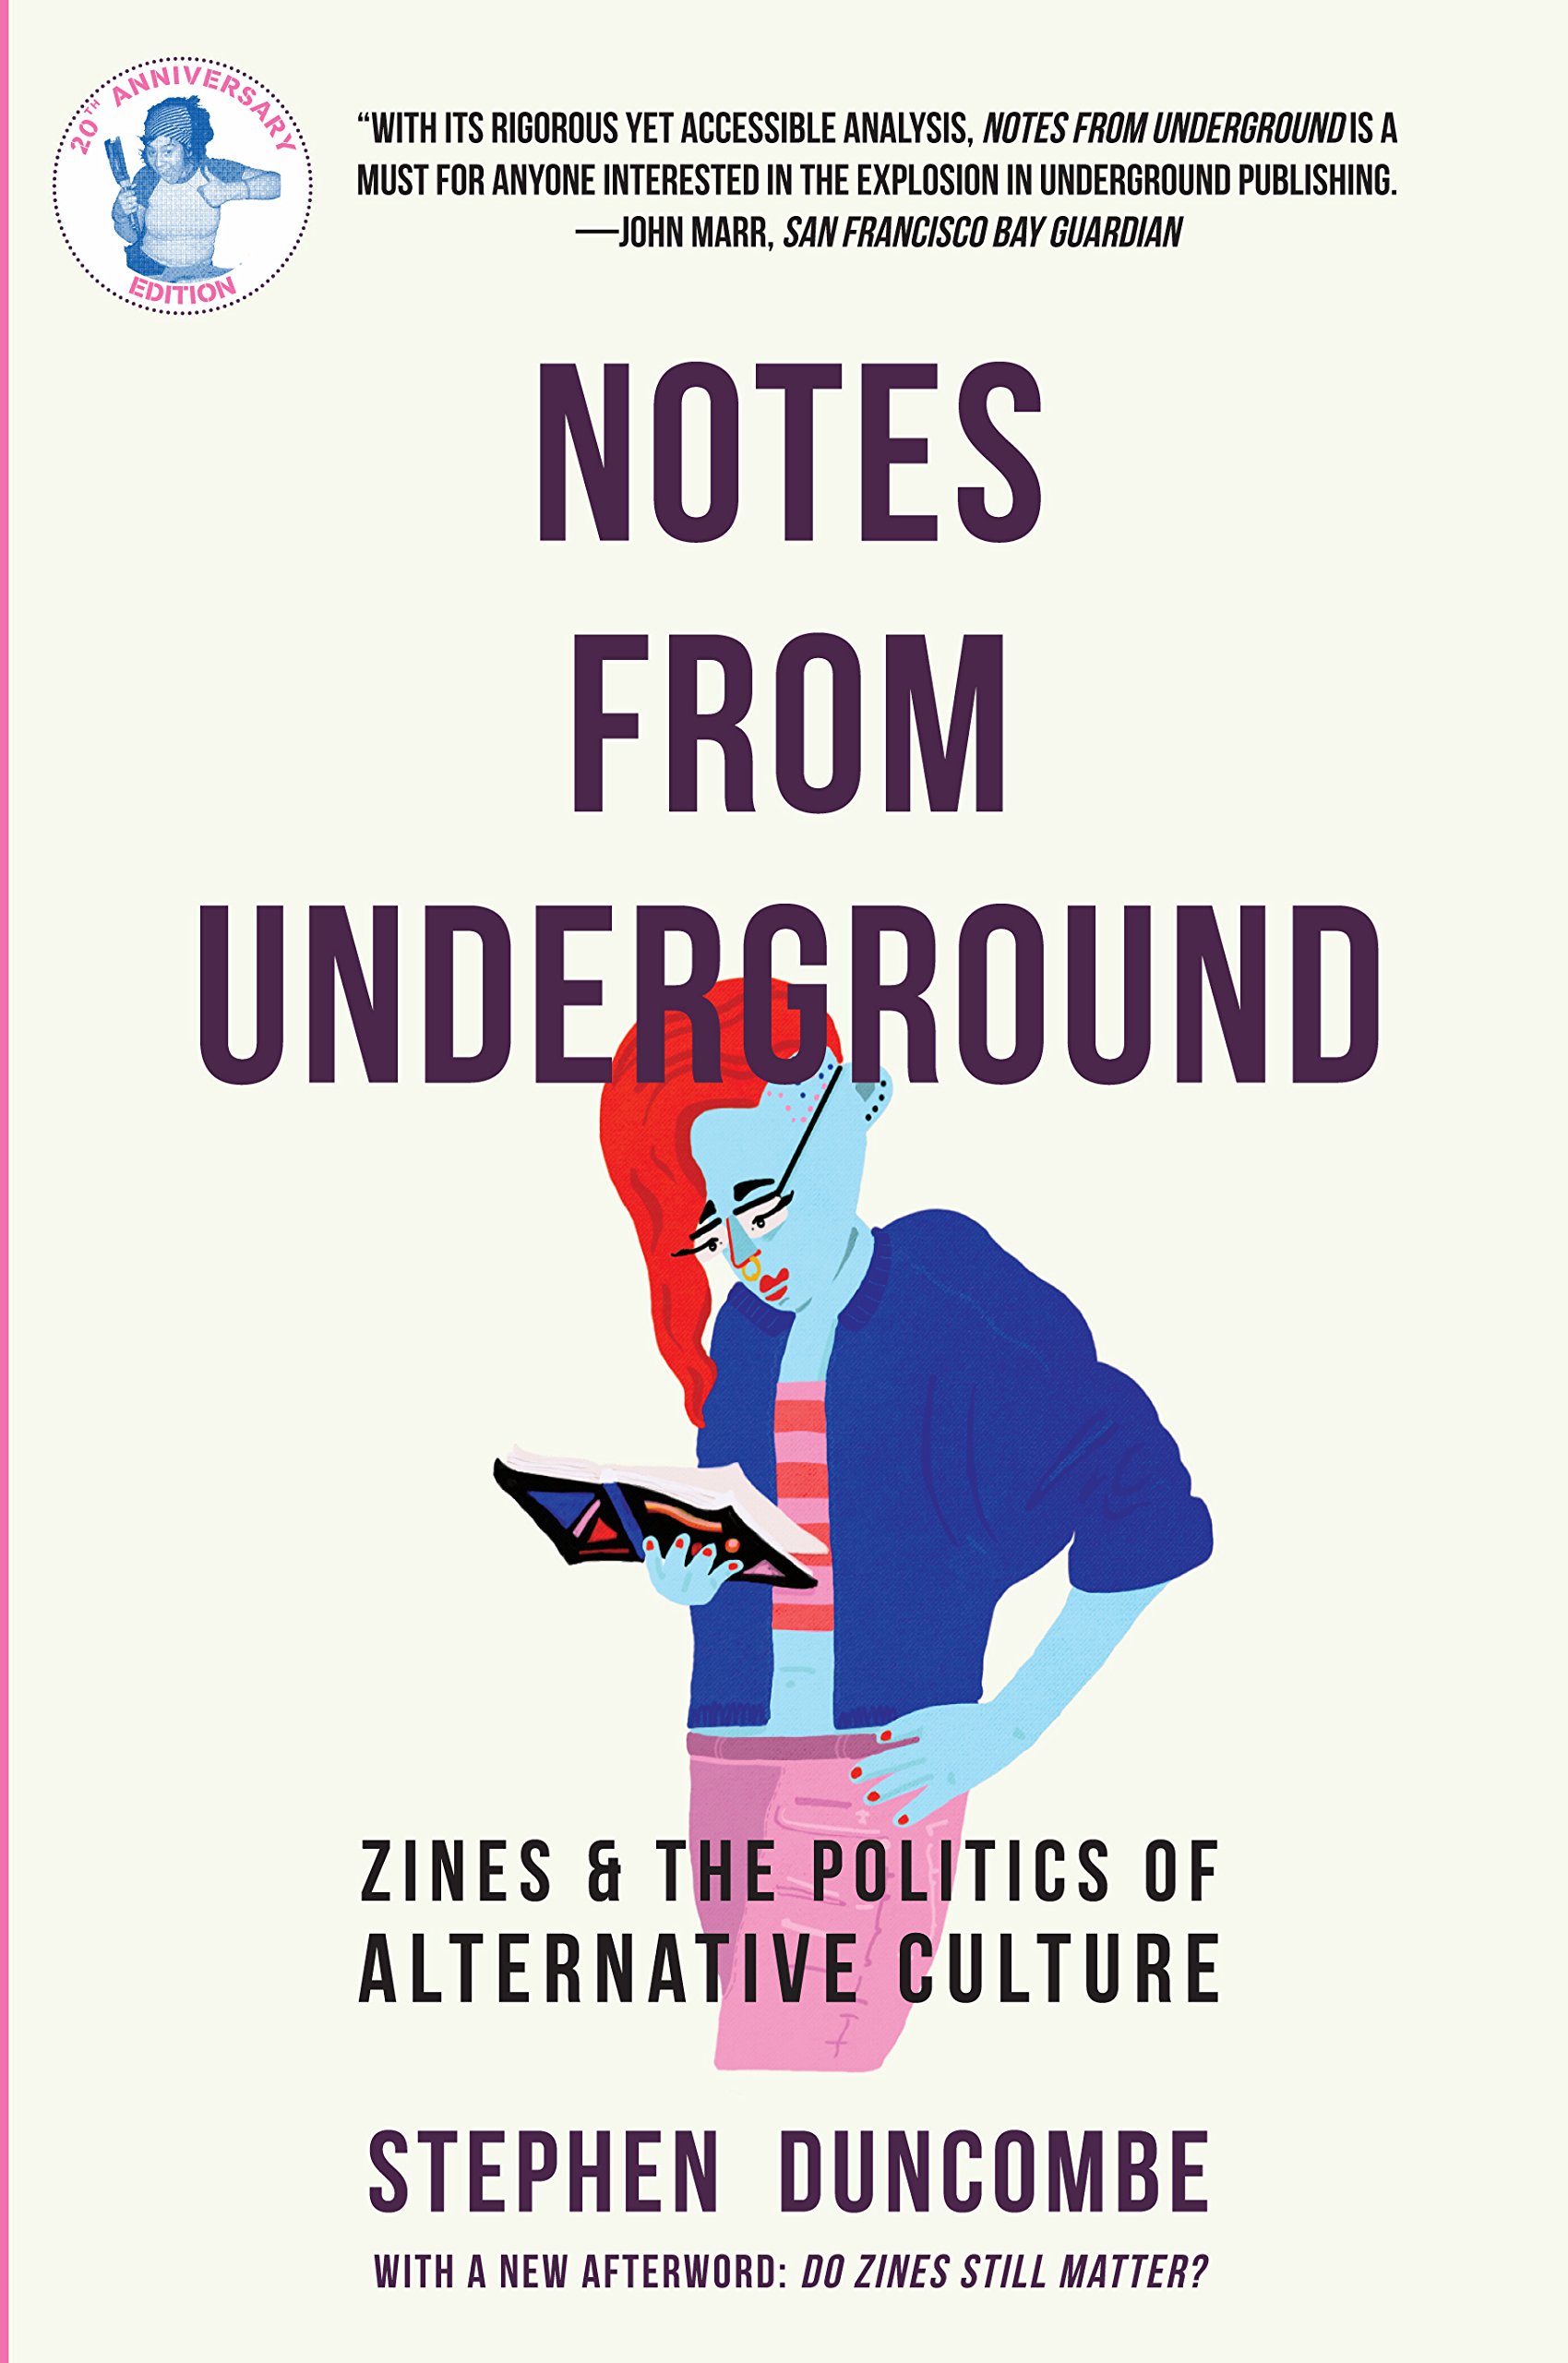 Notes from Underground (2017, Verso Books, Microcosm Publishing)